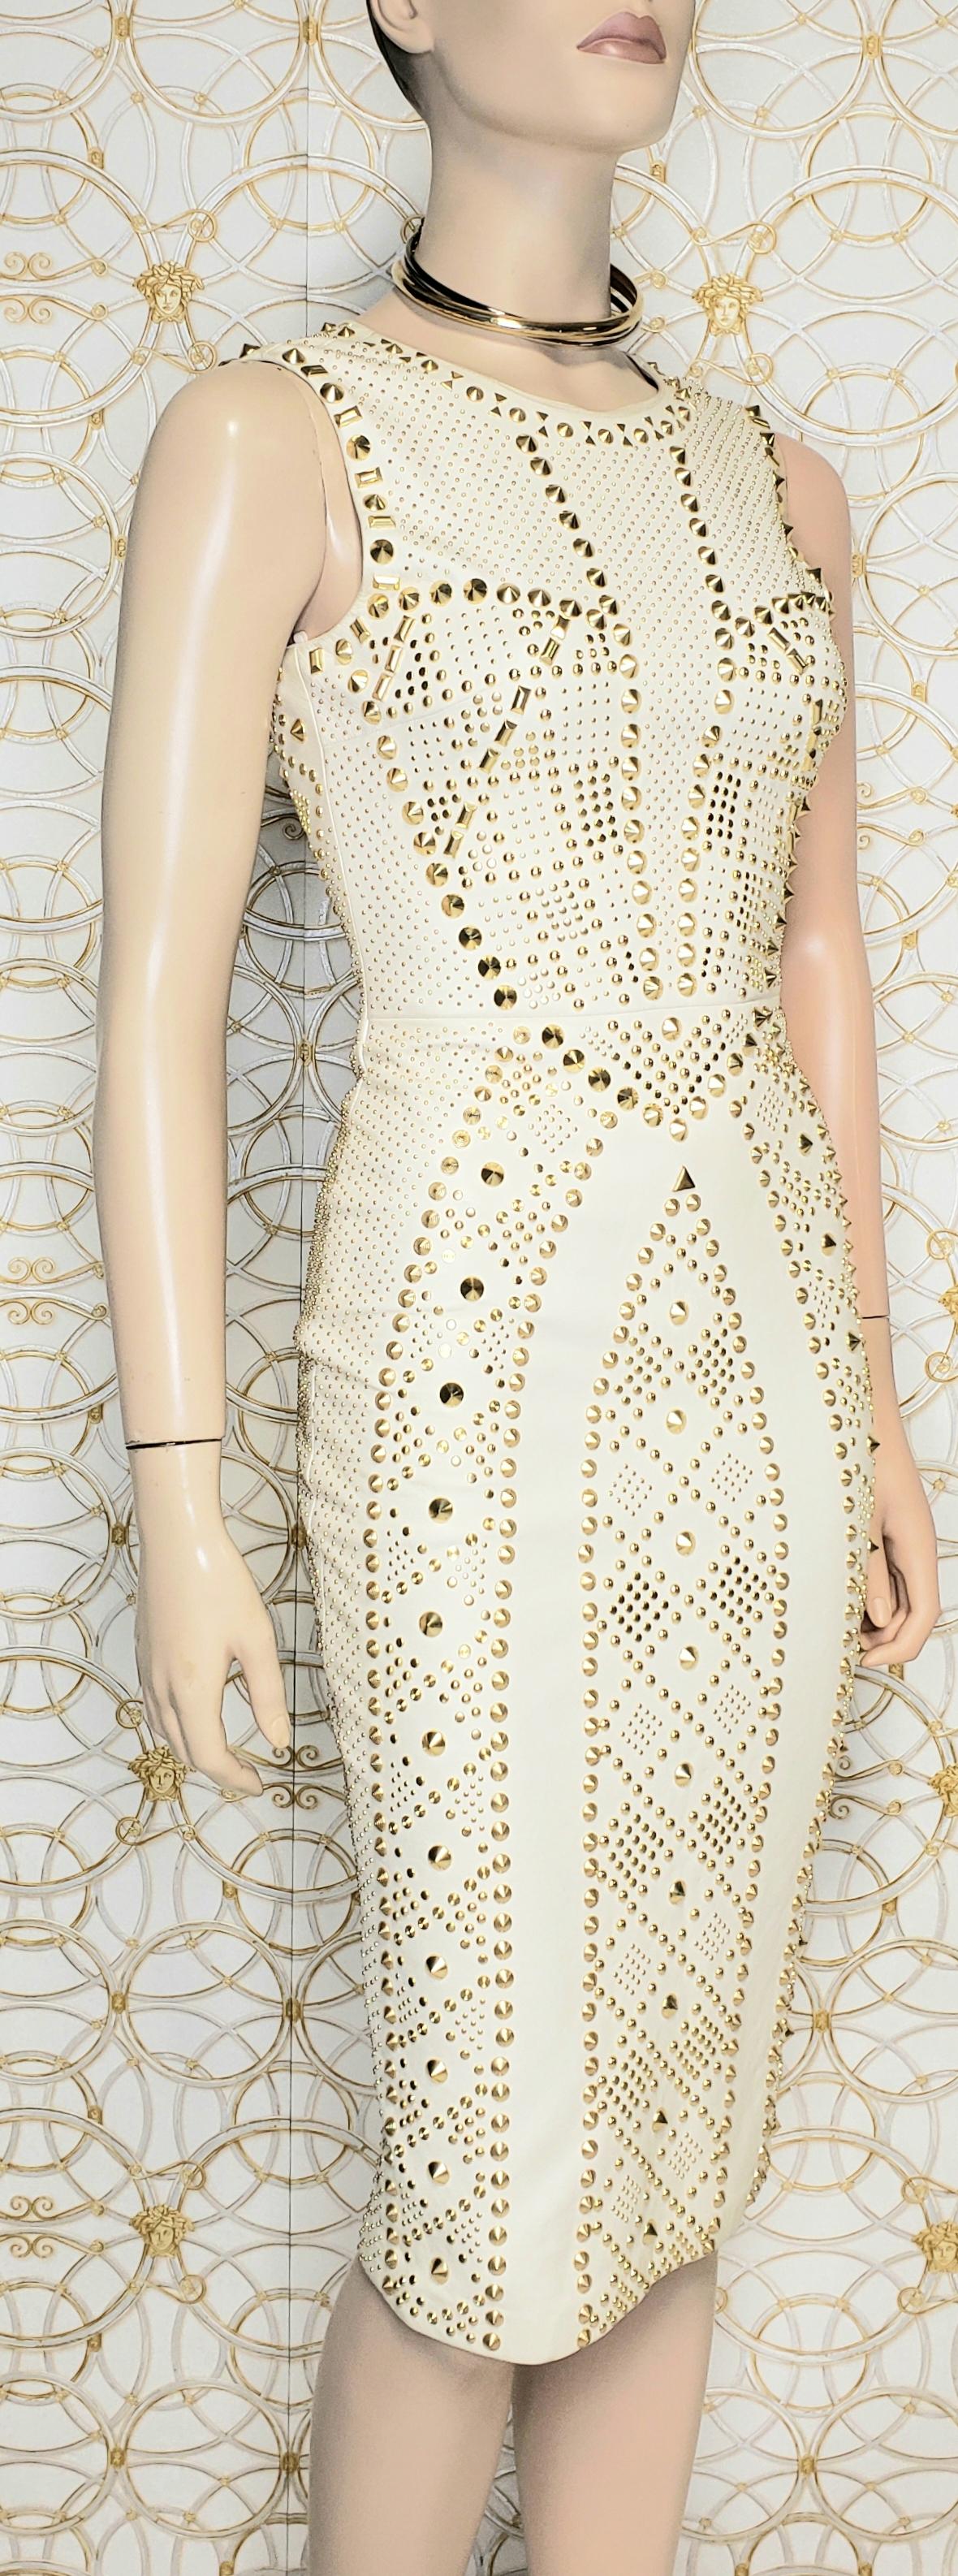 Women's S/S 2012 look #27 VERSACE WHITE STUDDED EMBELLISHED LEATHER DRESS 38 - 2 For Sale